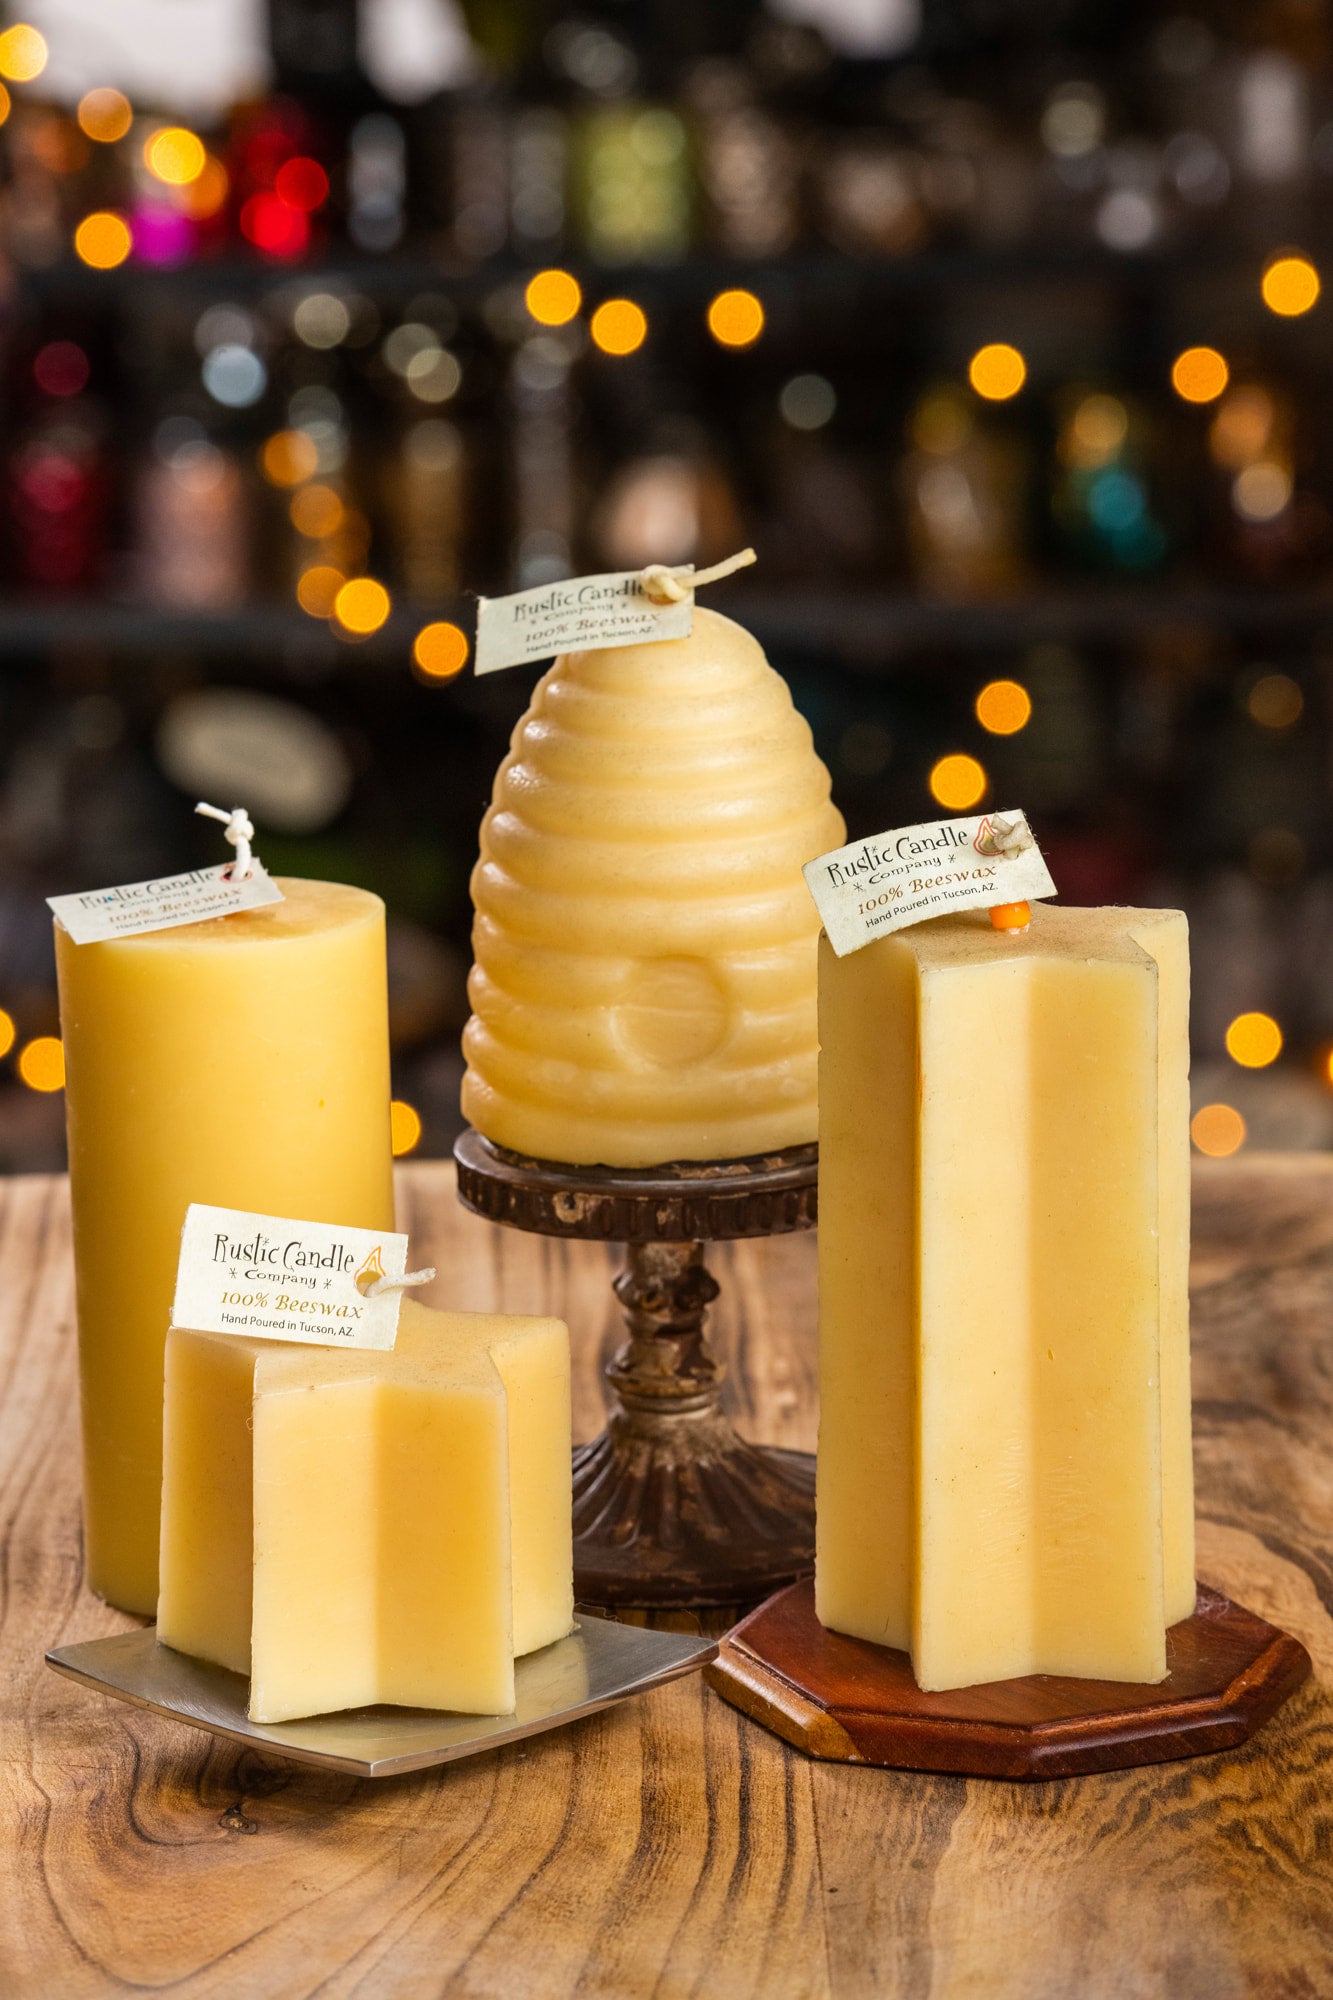 Rustic Beeswax  The Rustic Candle Company in Tucson, AZ